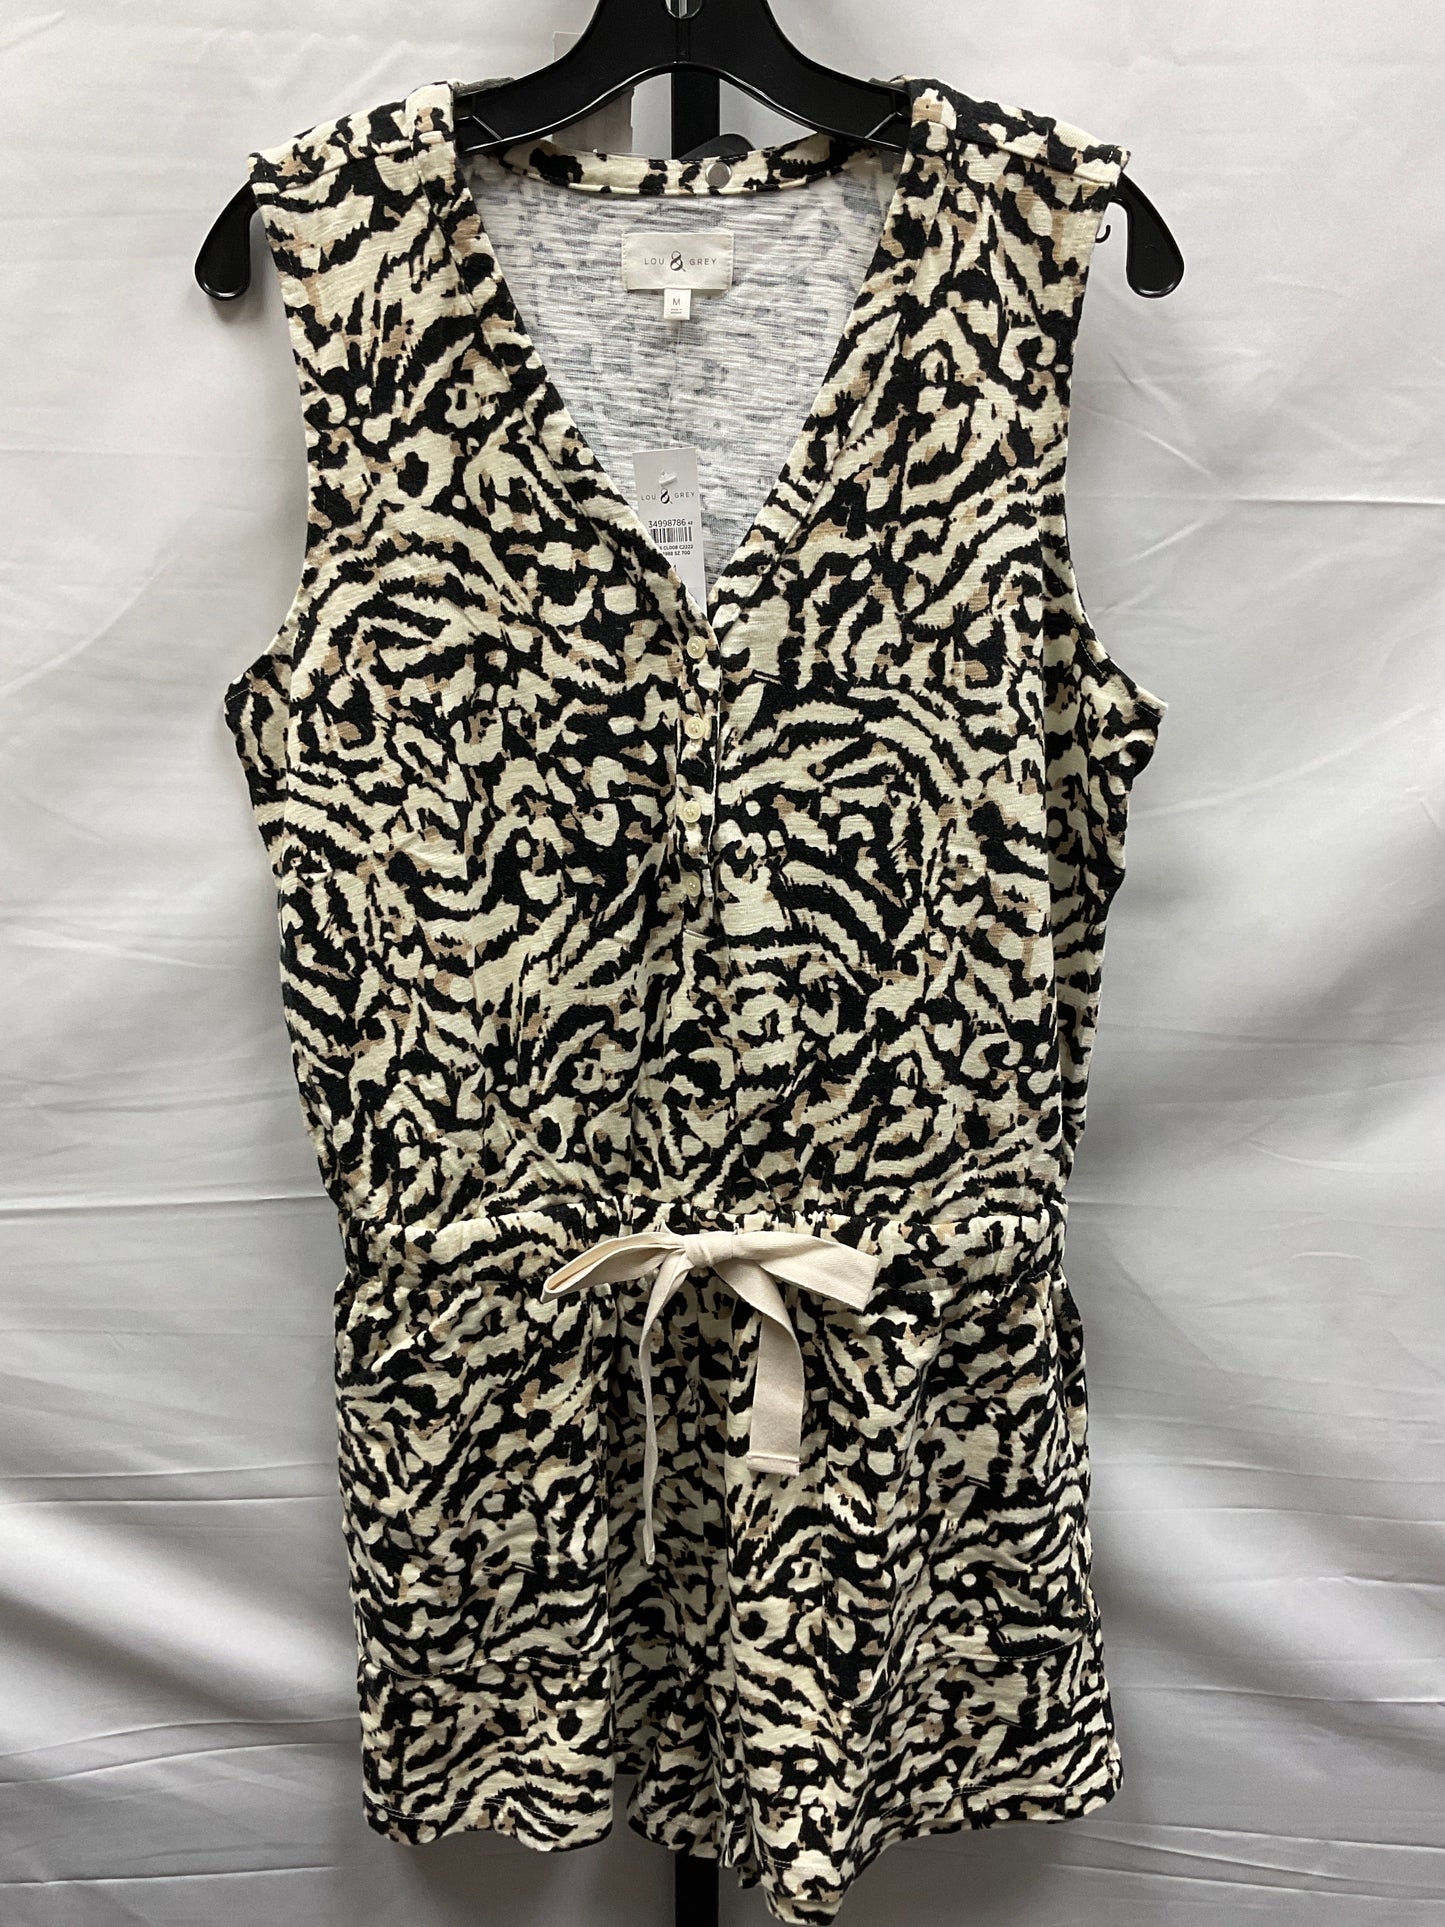 Animal Print Romper Lou And Grey, Size M